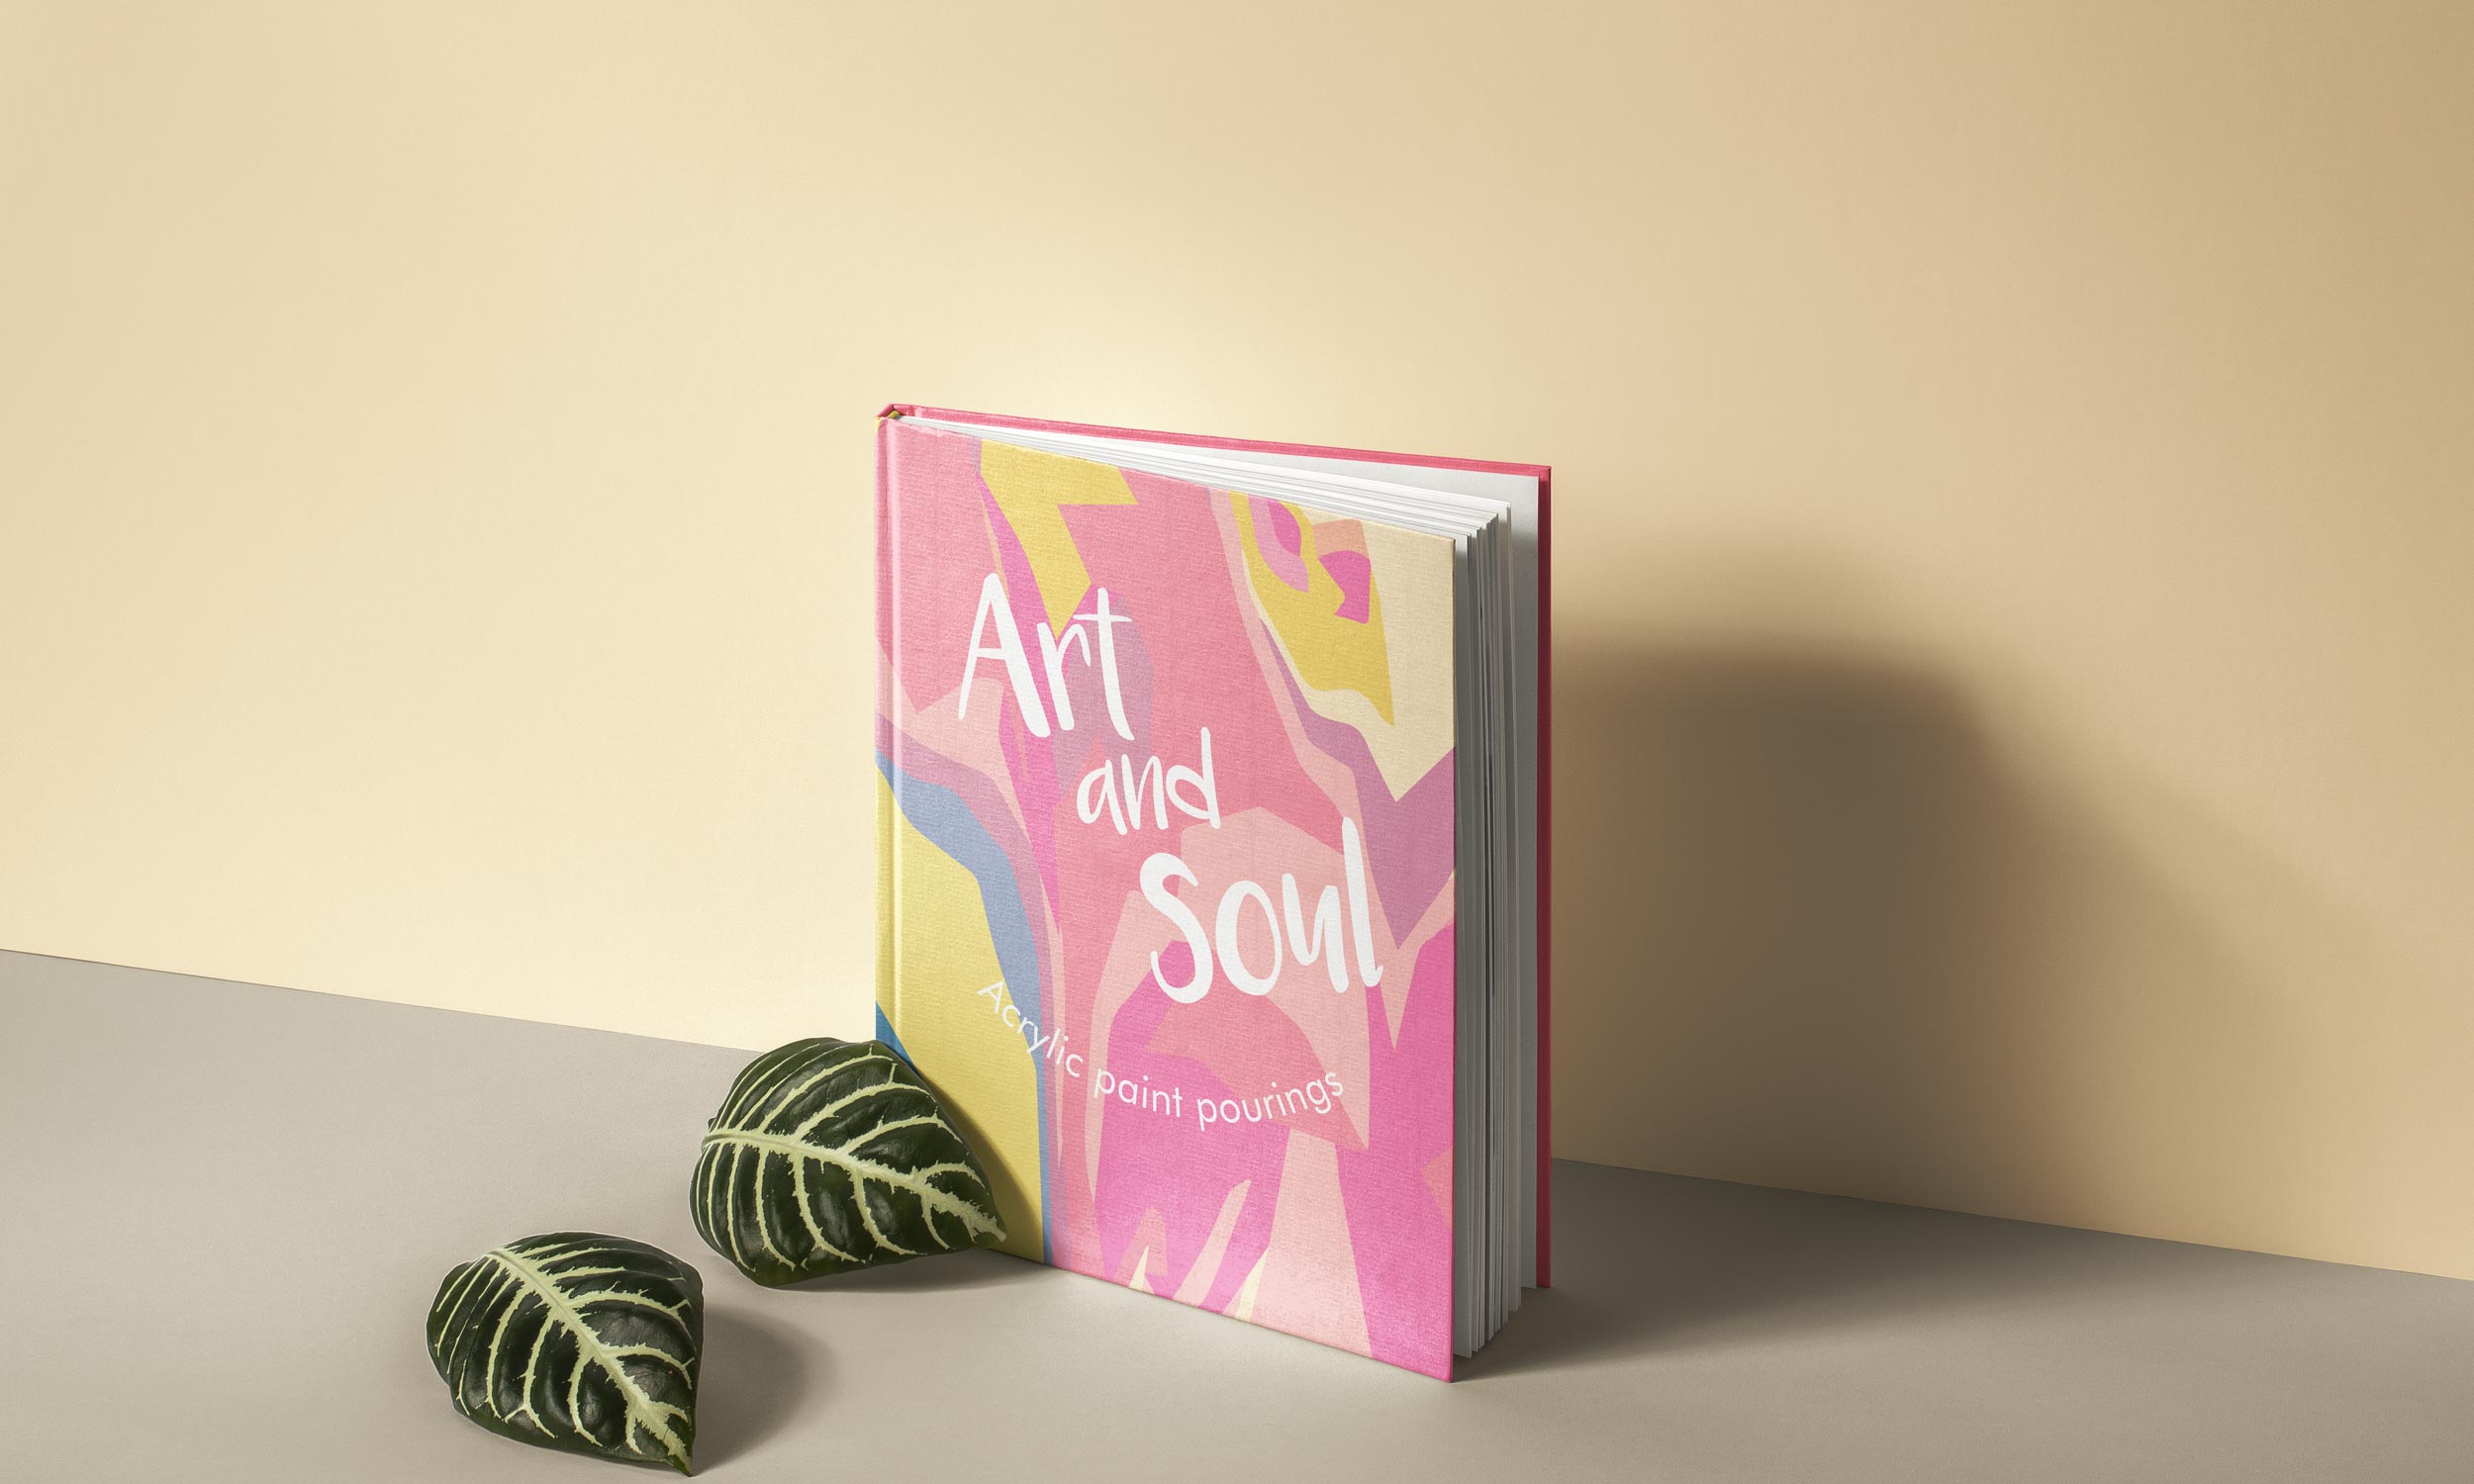 Art and soul – book